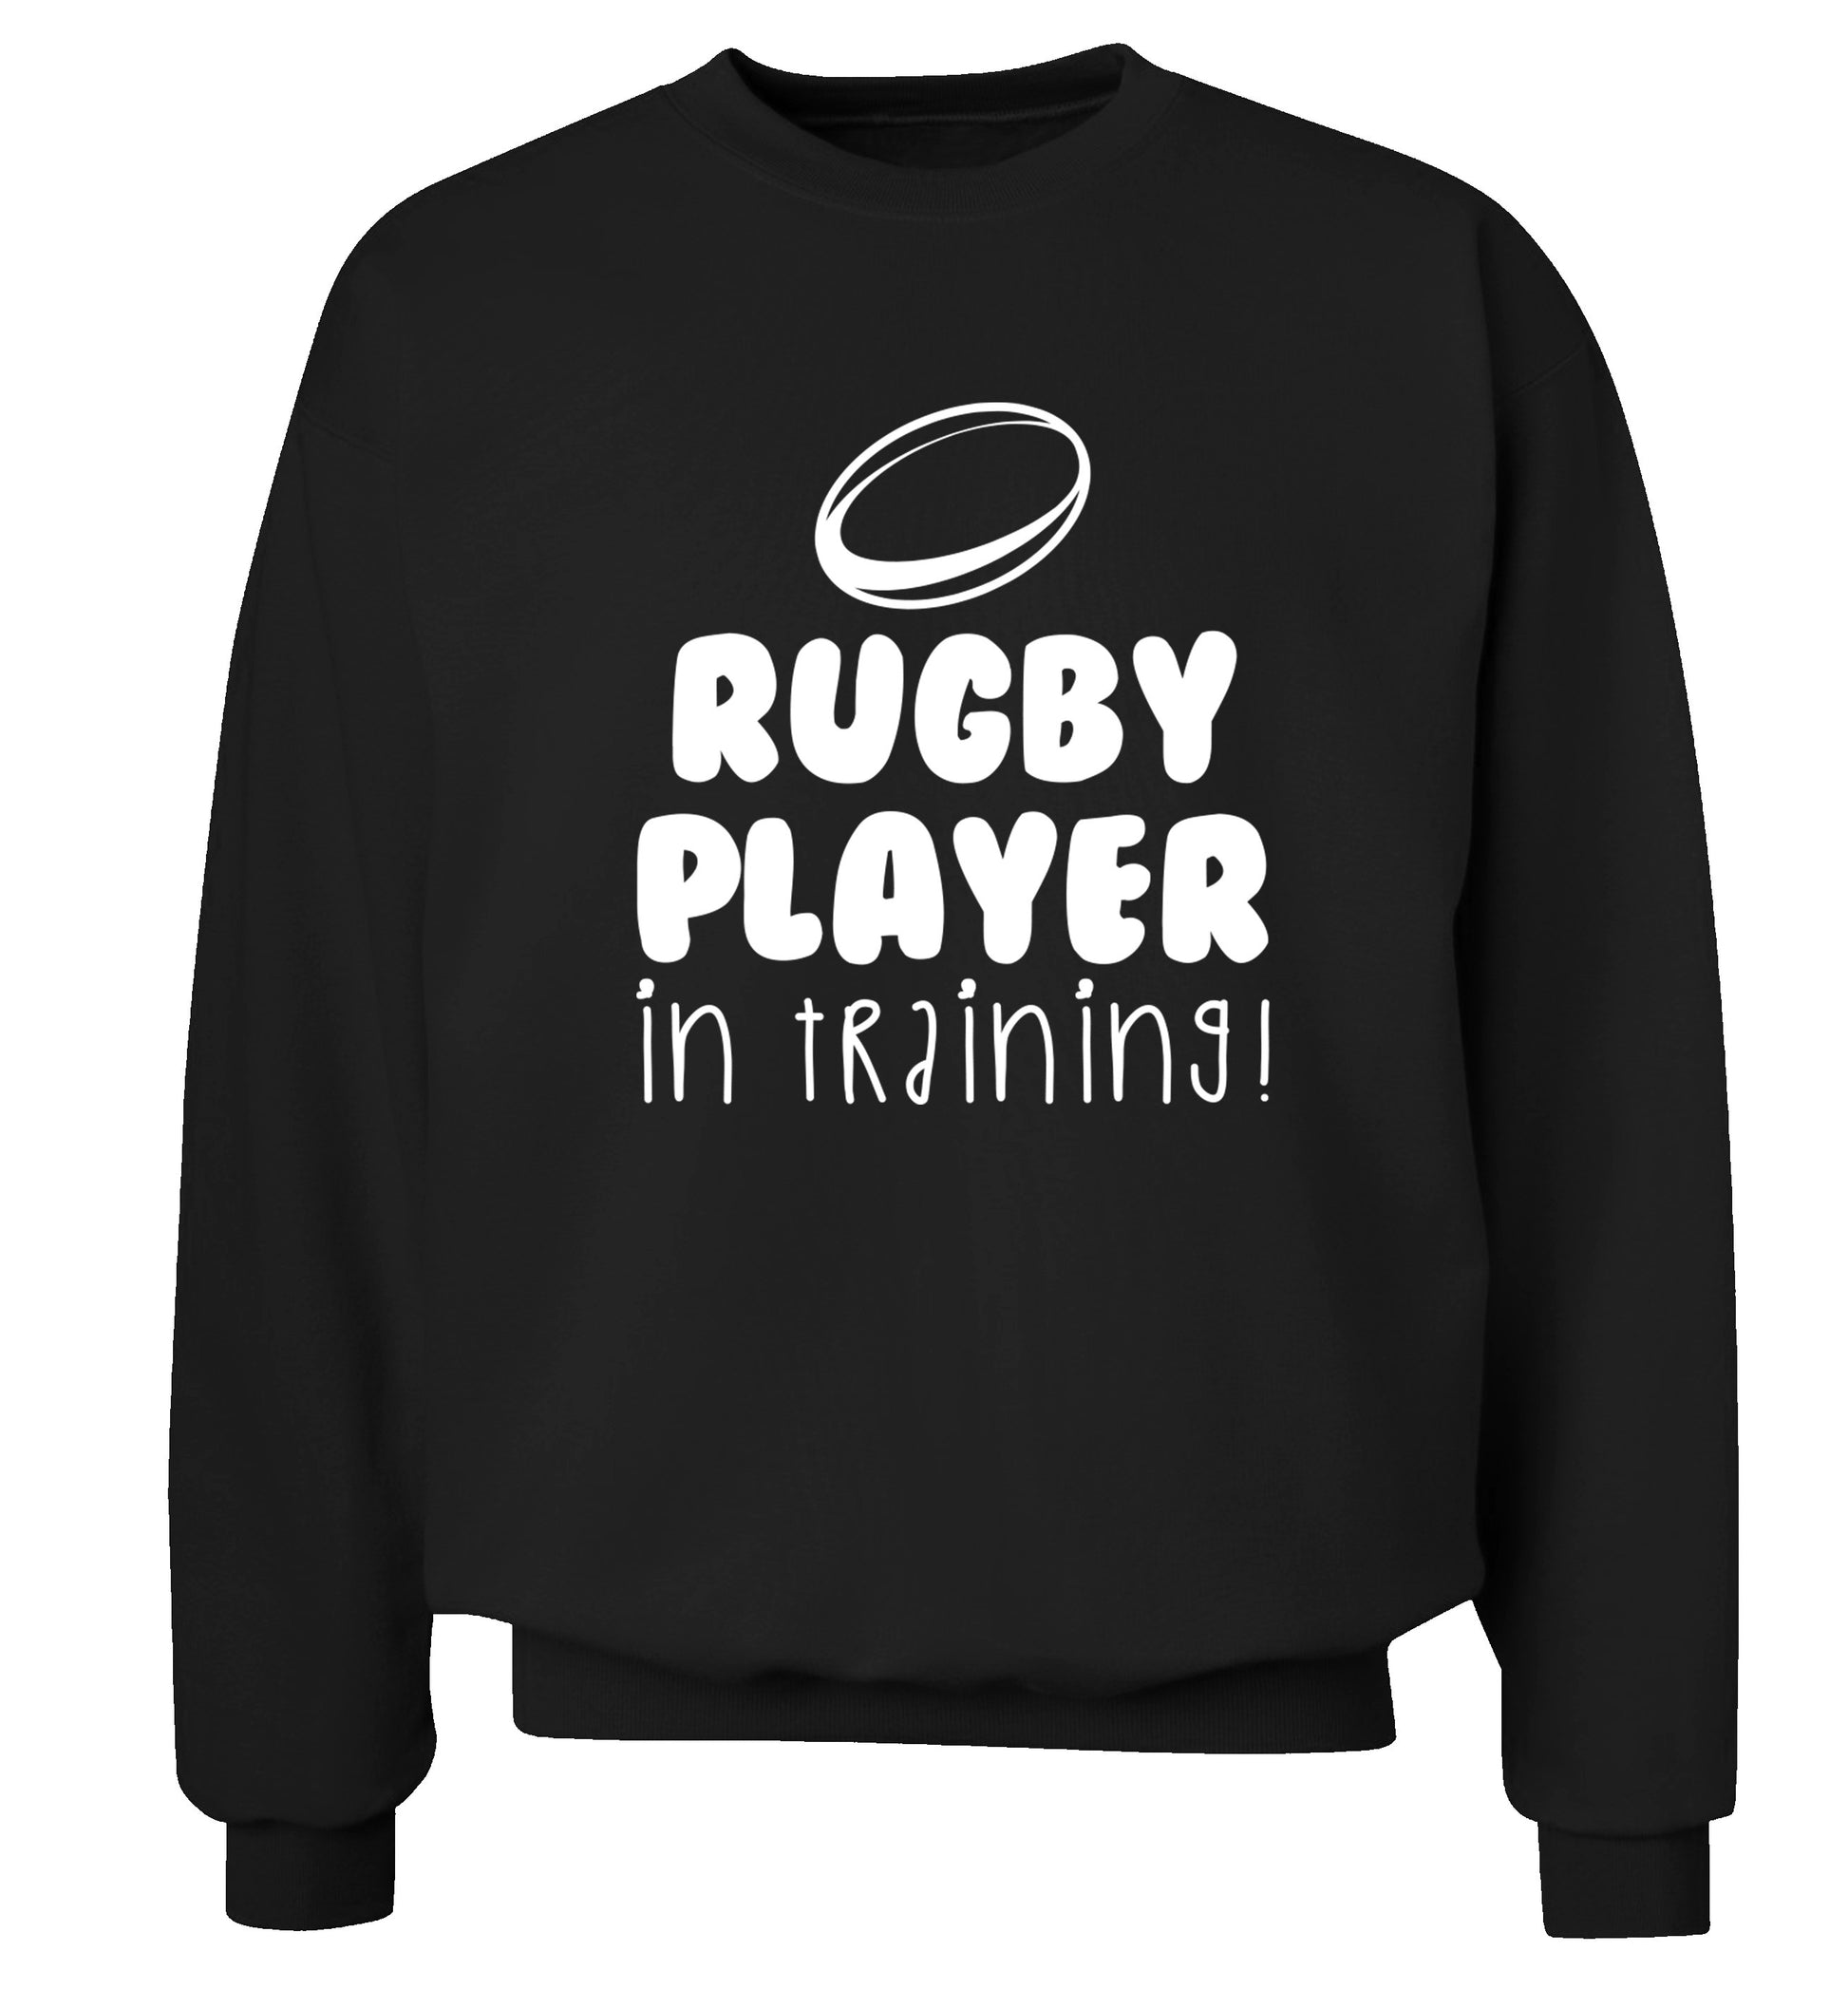 Rugby player in training Adult's unisex black Sweater 2XL